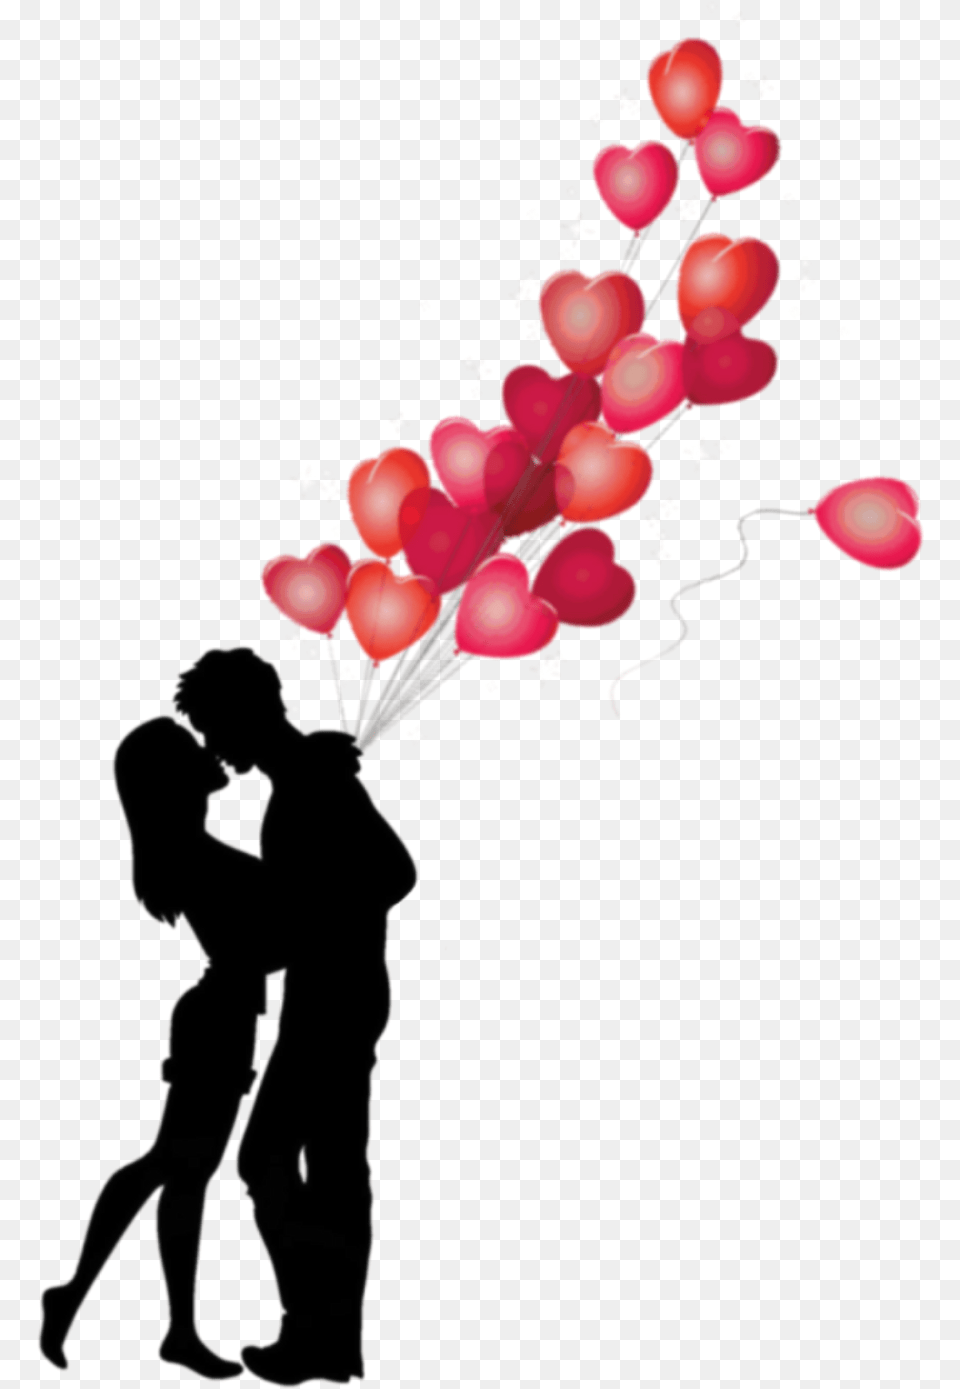 Hd Love Hearts Silhouette Valentine Romantic Love Images Hd, Art, Balloon, Graphics, Flower Free Png Download